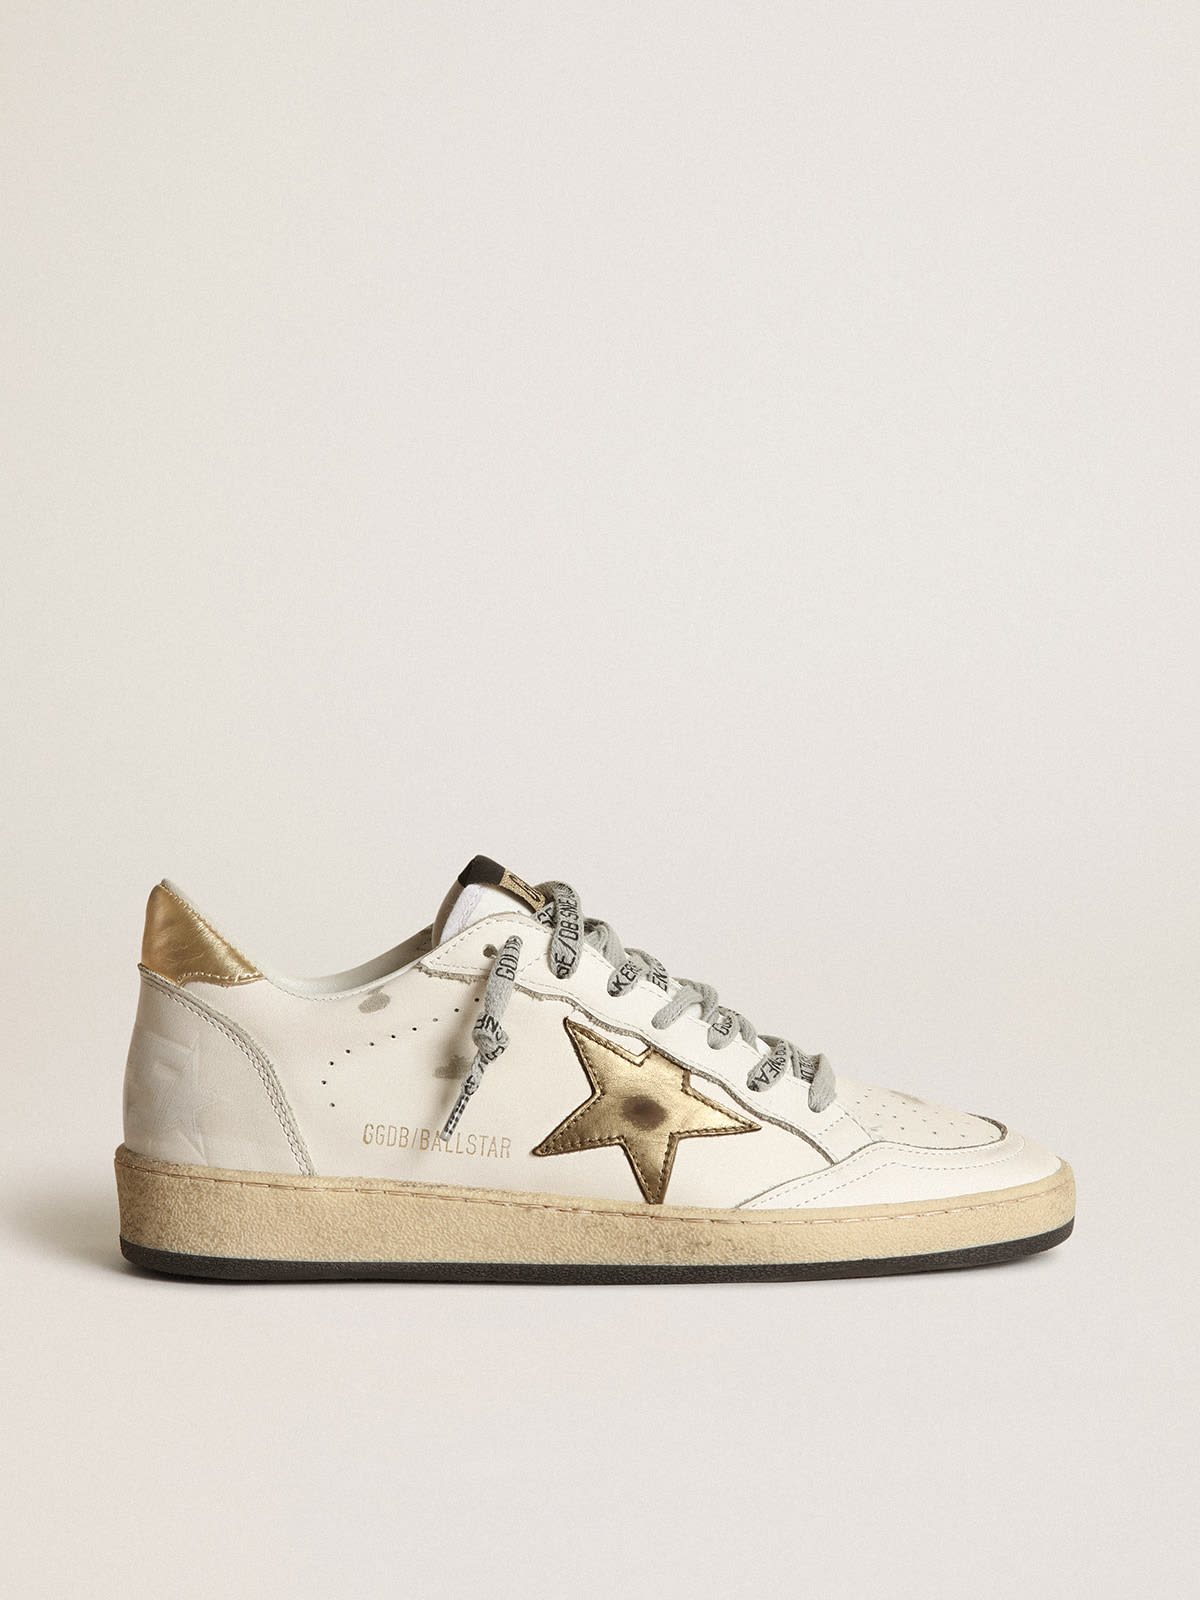 Ball Star sneakers with gold star and heel tab | Golden Goose